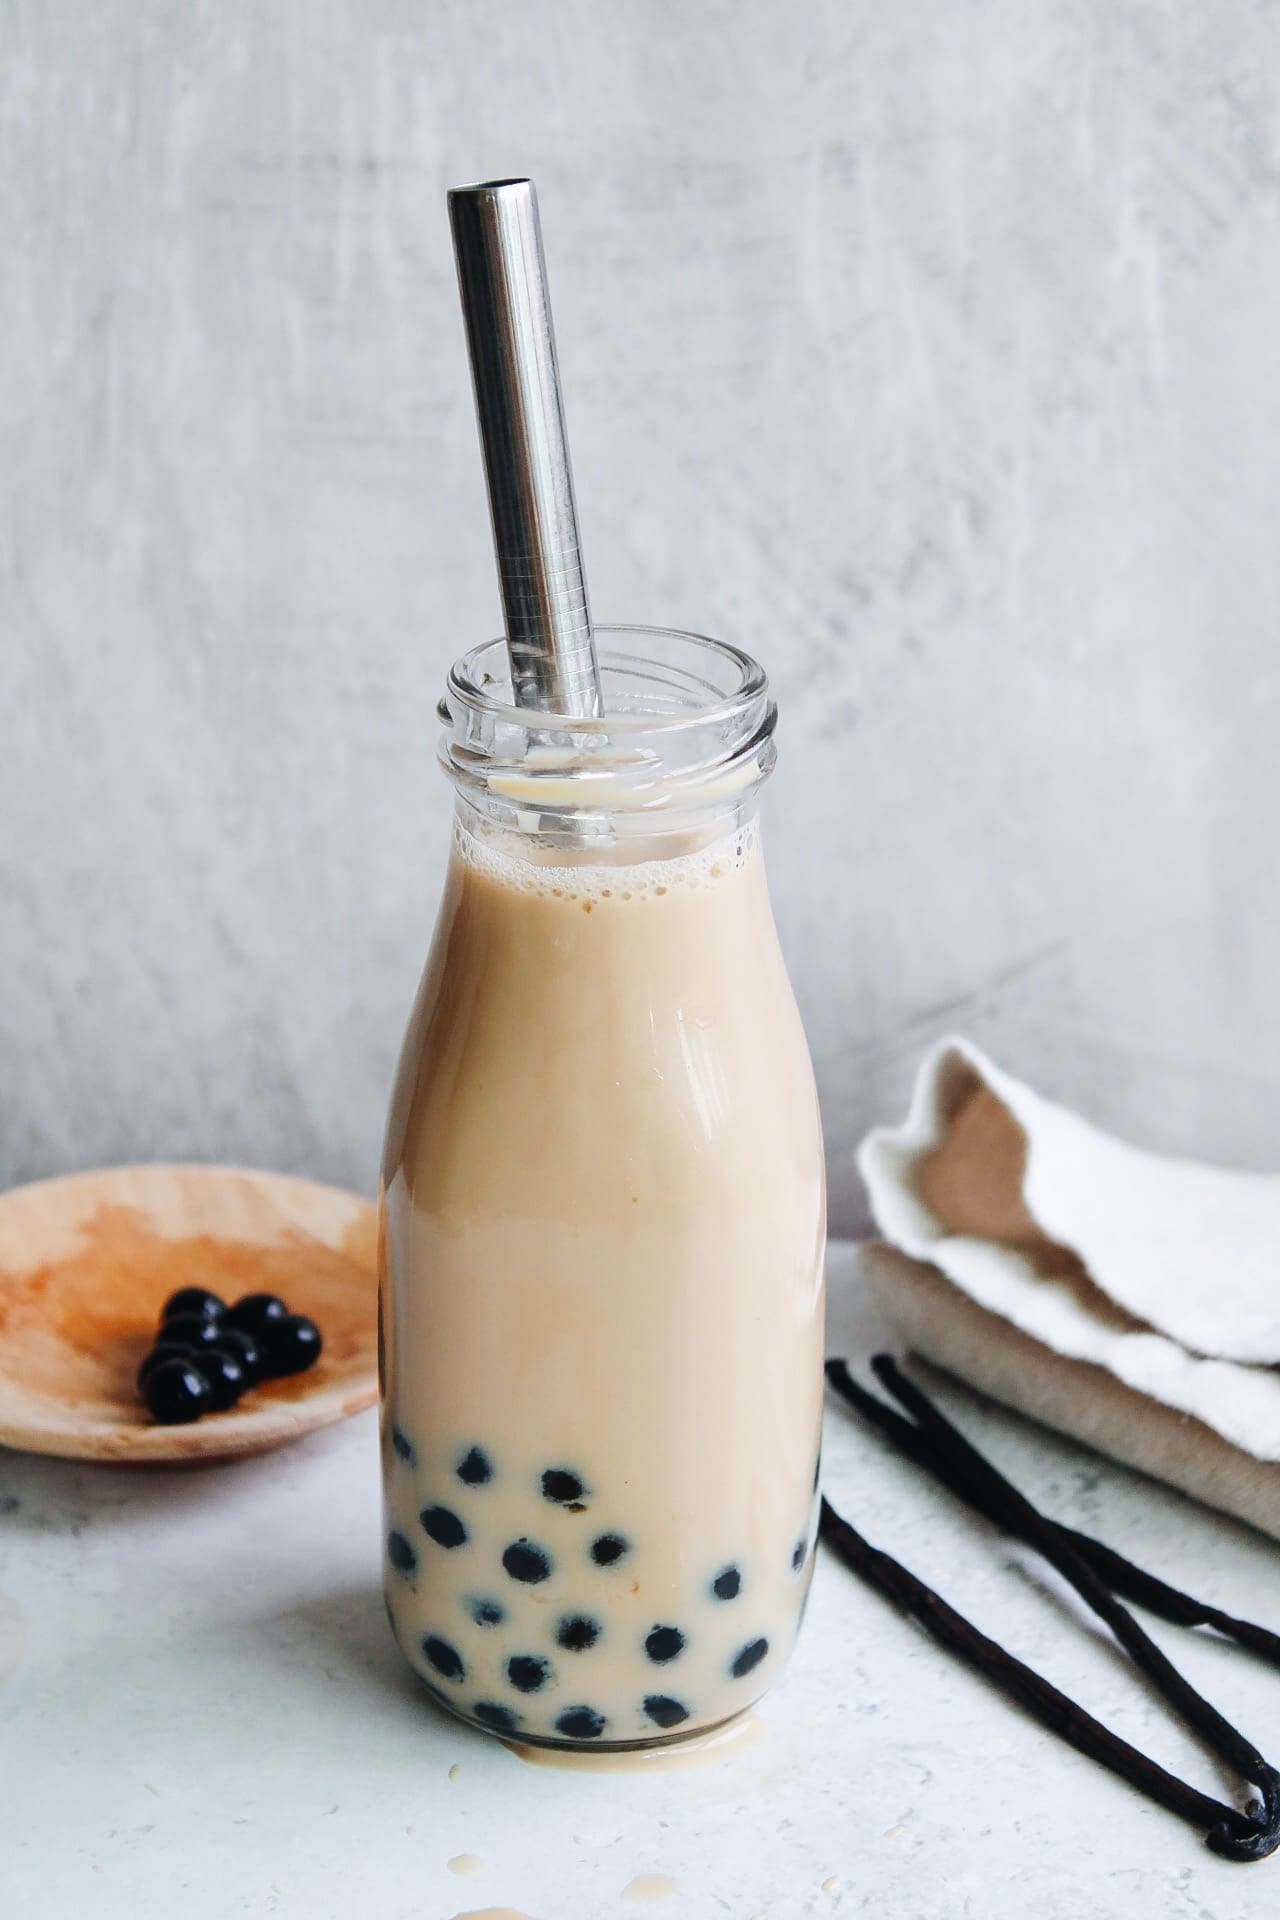 vanilla milk tea in a glass bottle with a metal straw